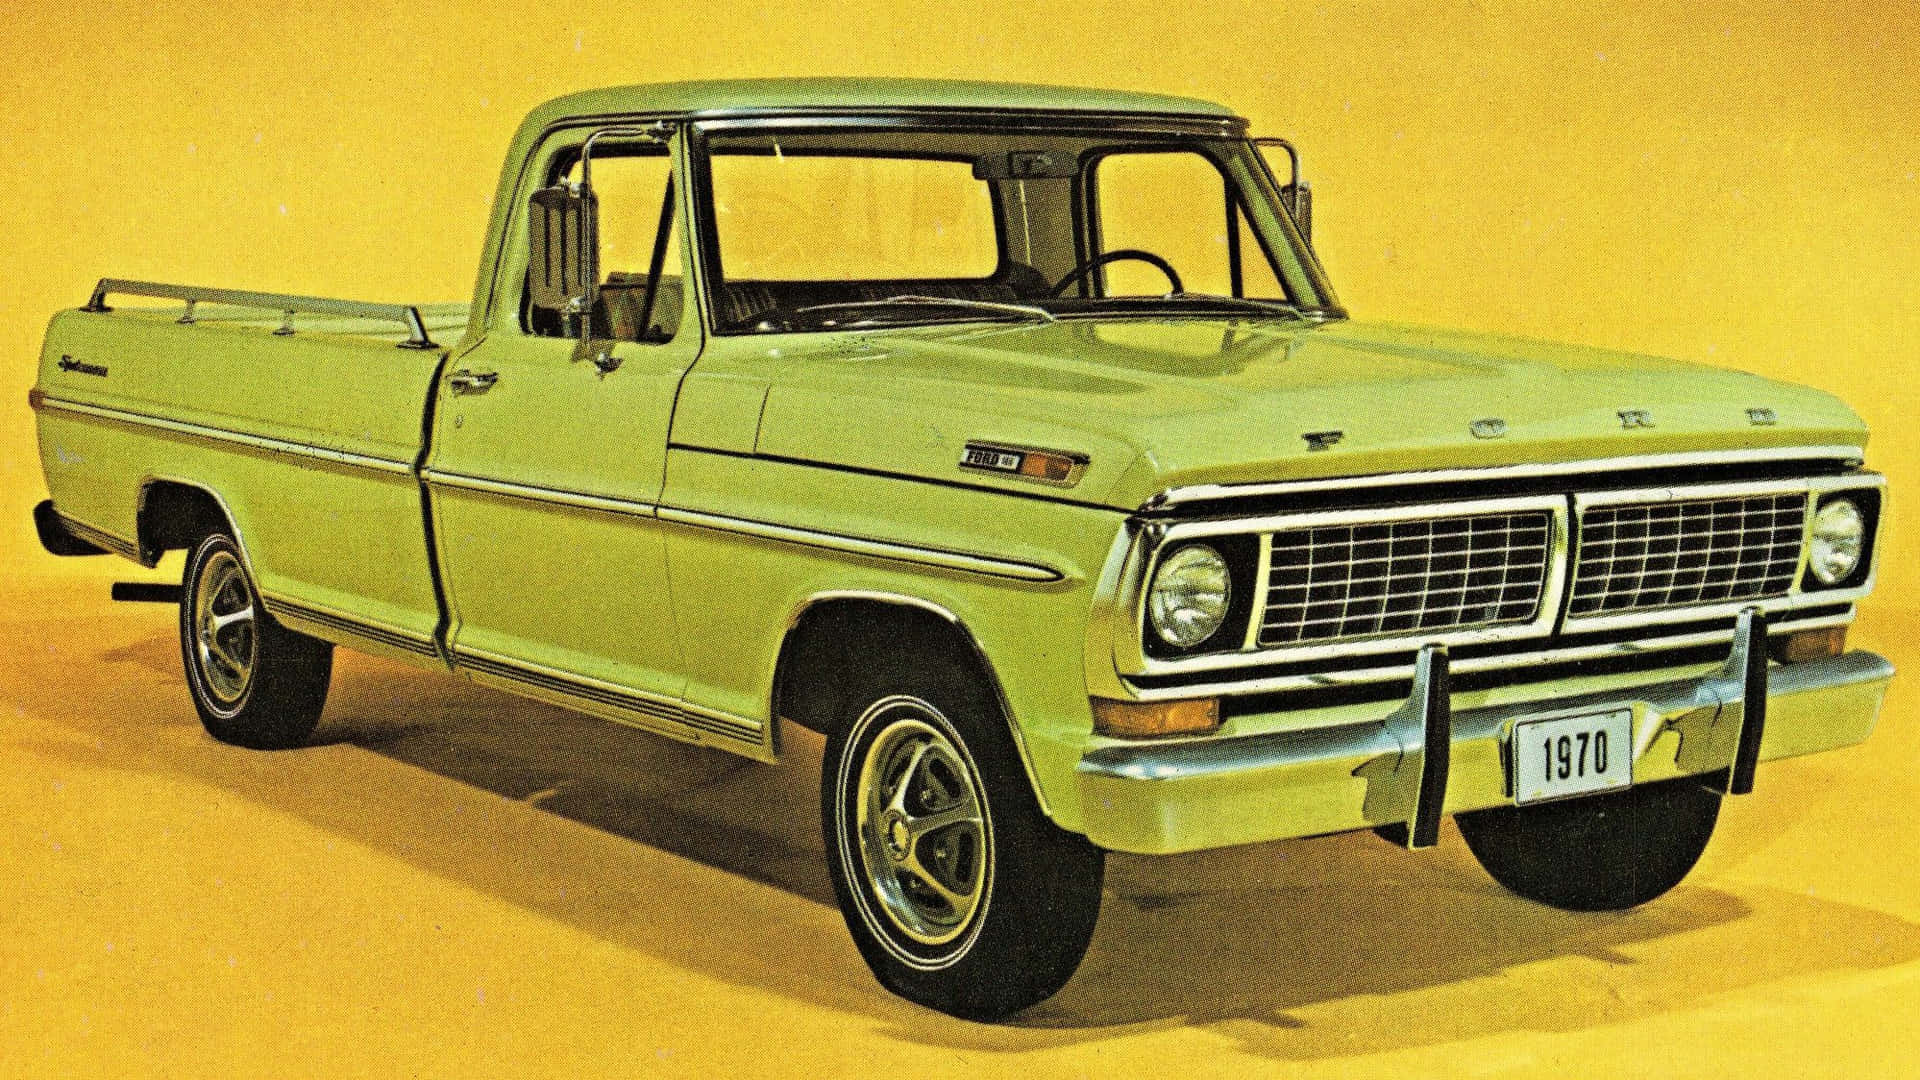 A Green Ford Pickup Truck Is Shown In A Yellow Background